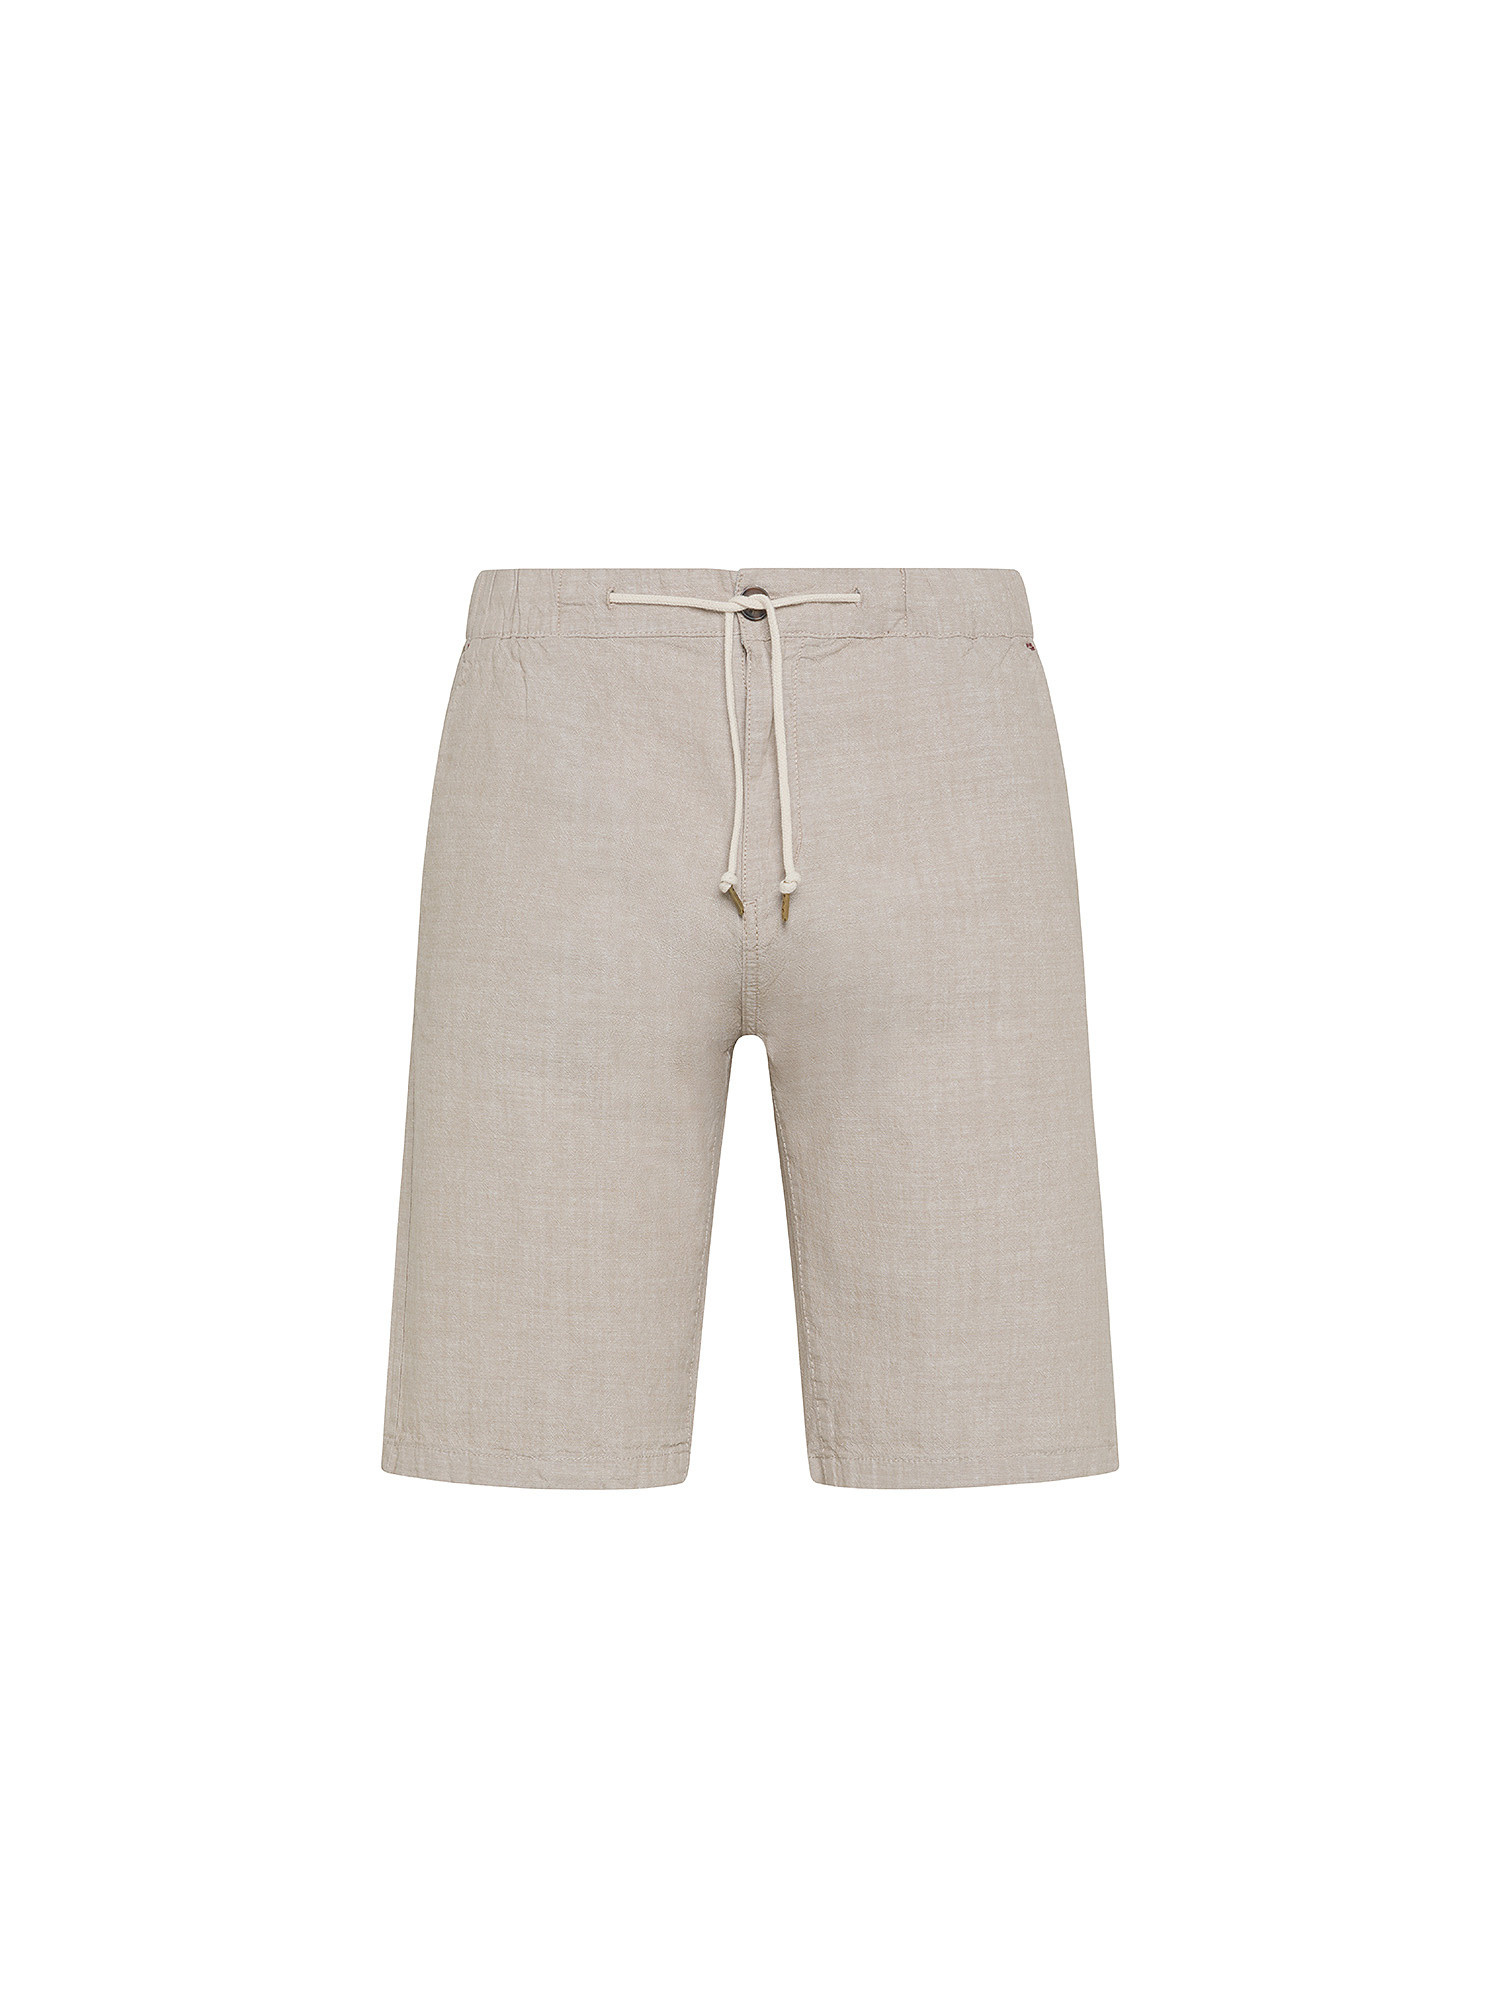 JCT - Chino bermuda in pure cotton with laces, Sand, large image number 0